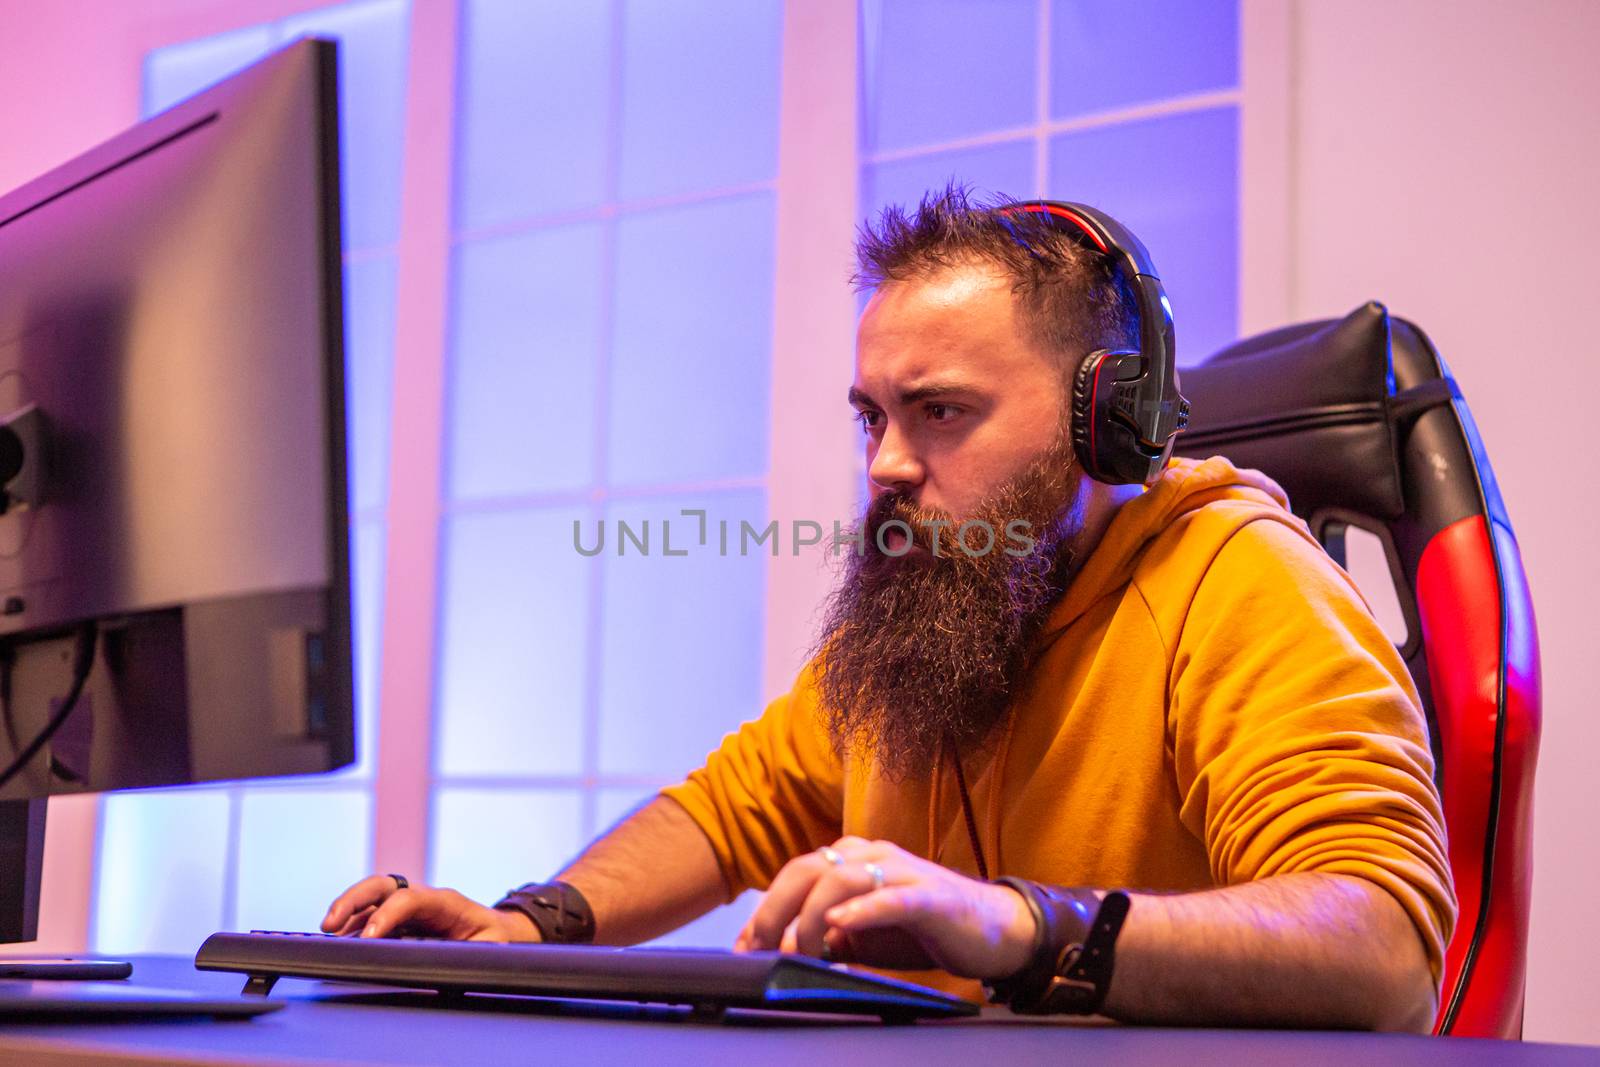 Professional gamer with long beard in front of powerful gaming rig in room full of neon lights